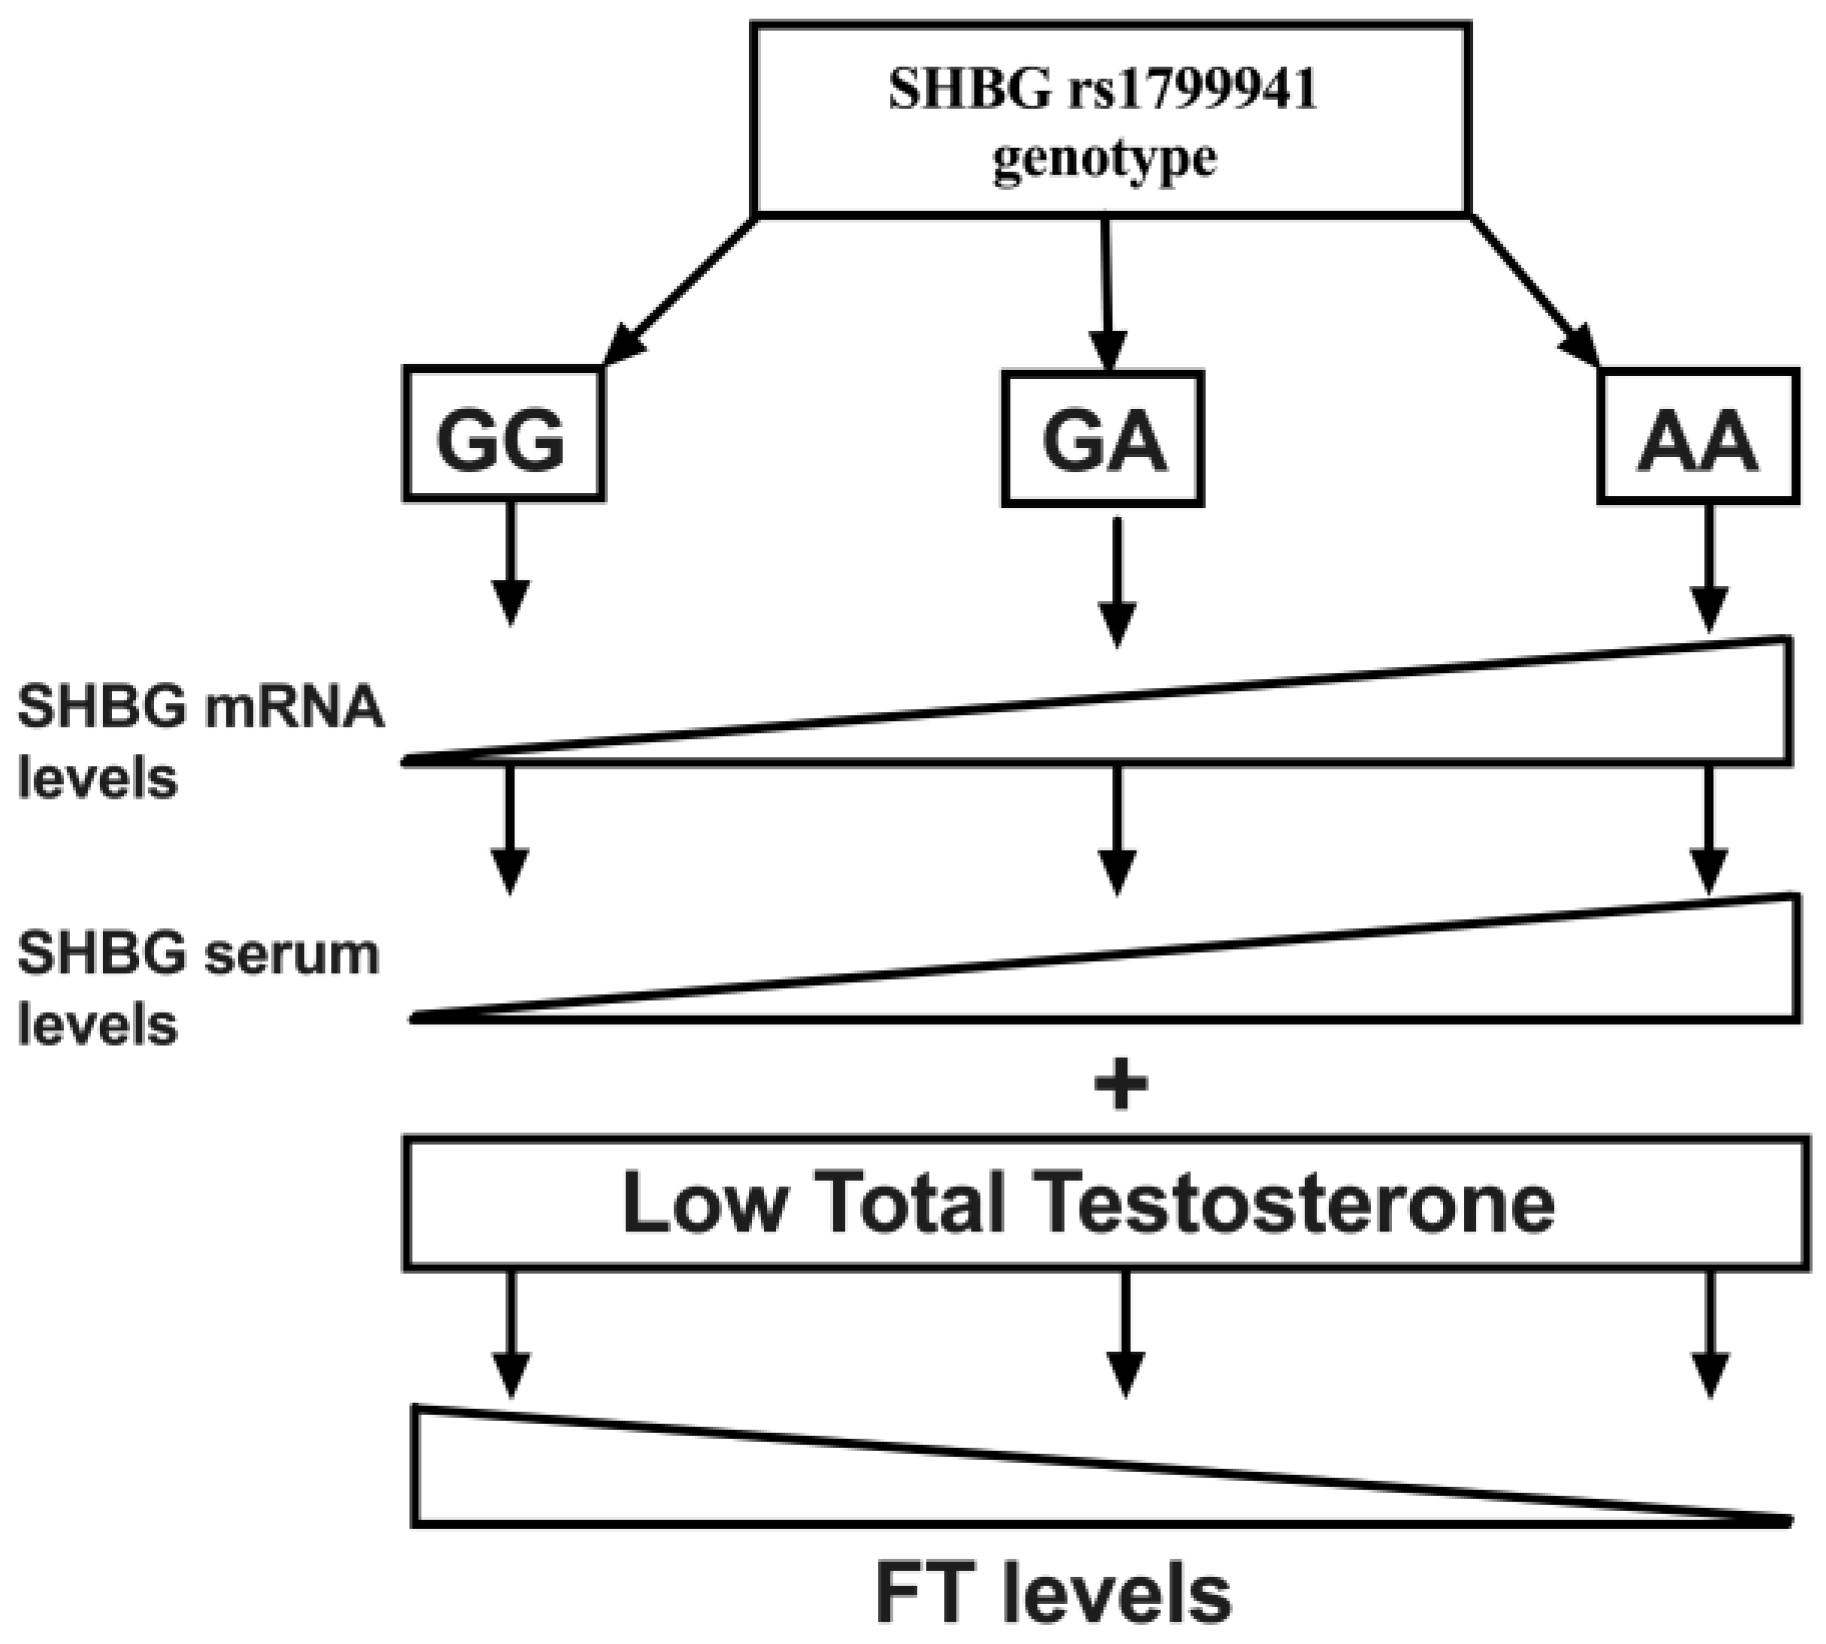 JCM | Free Full-Text | Effects of SHBG rs1799941 Polymorphism on Free  Testosterone Levels and Hypogonadism Risk in Young Non-Diabetic Obese Males  | HTML